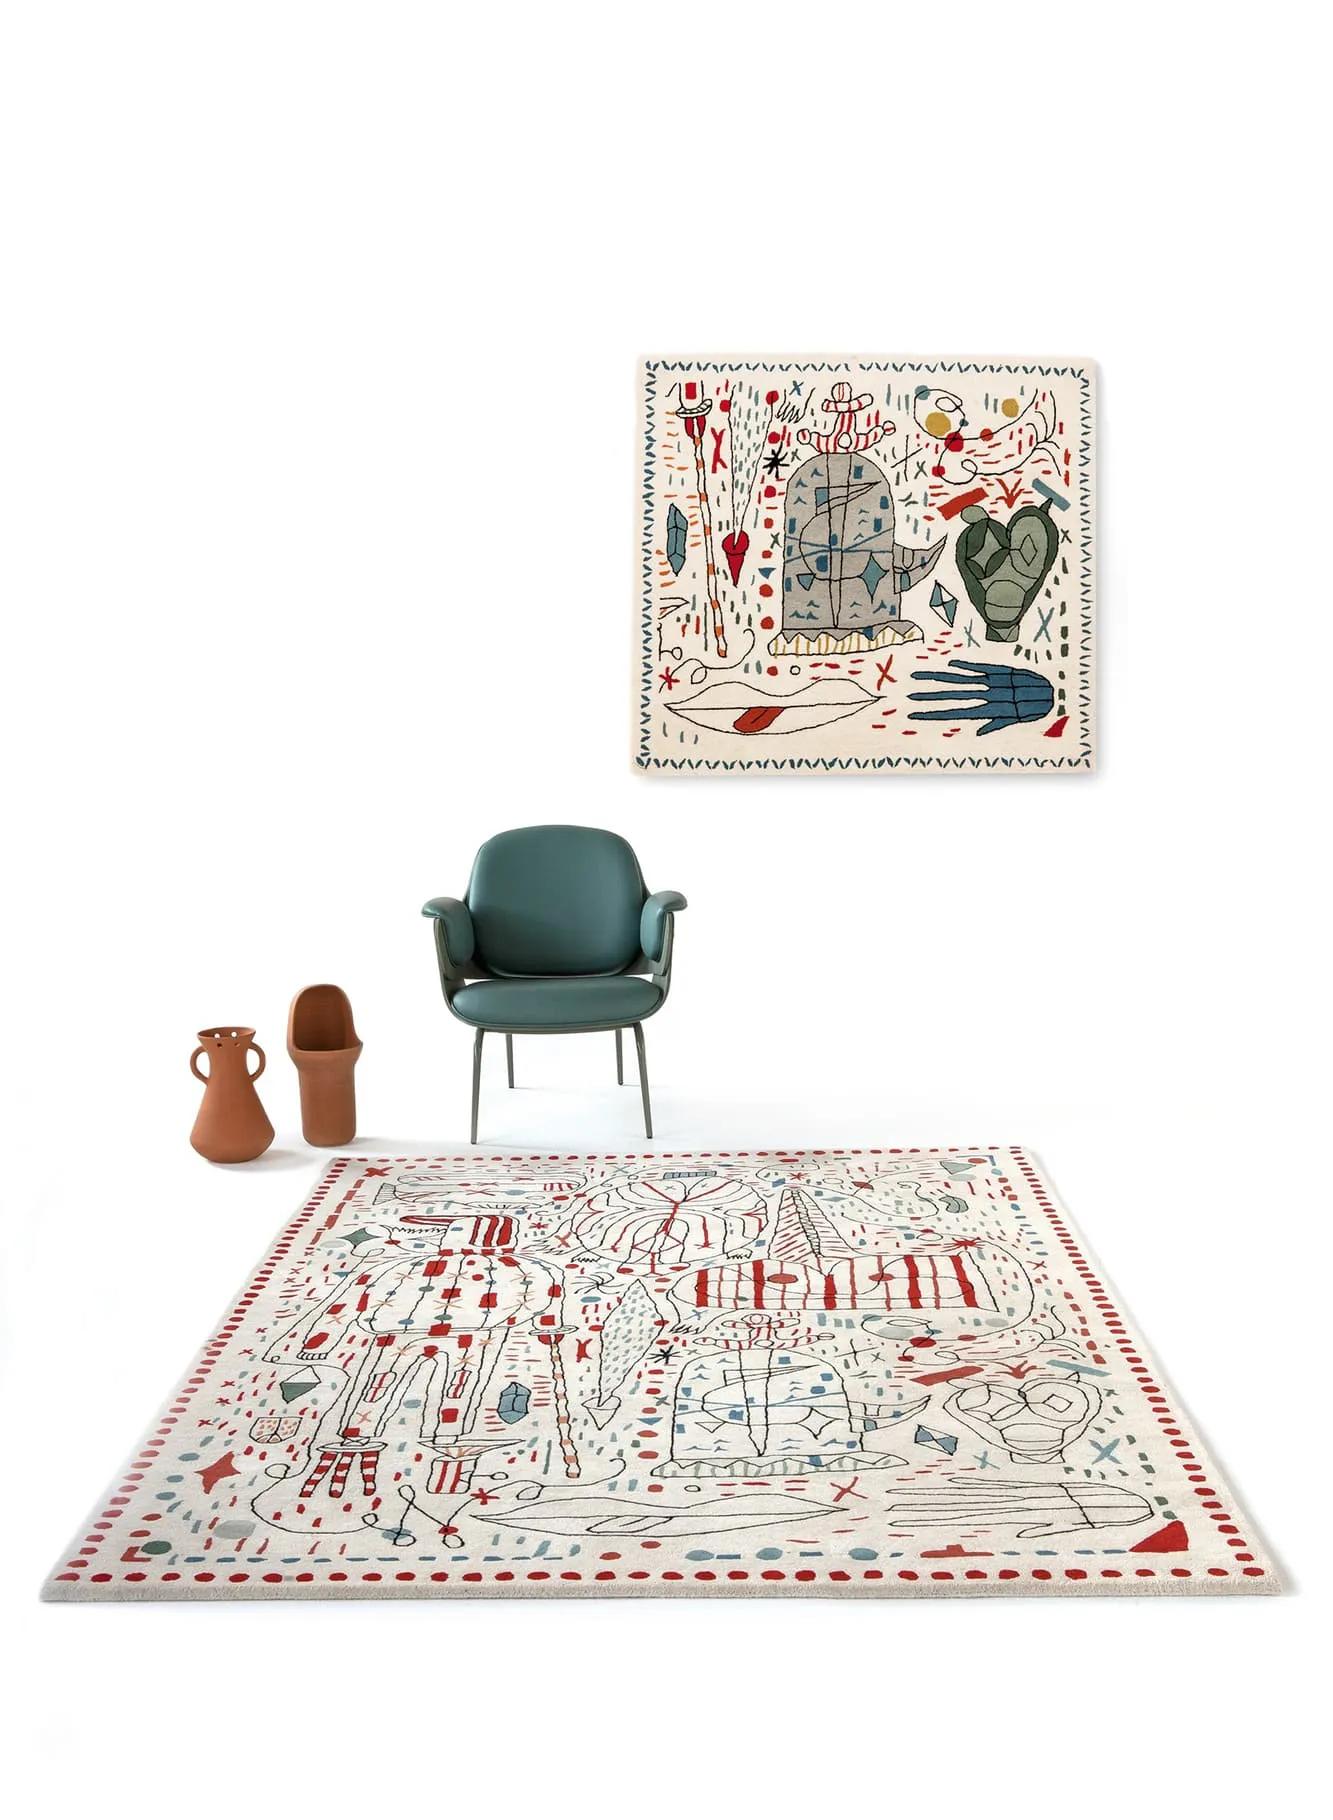 'Hayon x Nani' Hand-tufted rug or tapestry by Jaime Hayon for Nanimarquina.

Executed in 100% hand-tufted New Zealand wool. The 'Hayon x Nani' collection faithfully encapsulates the whimsical, dreamy visions of designer Jaime Hayon's original